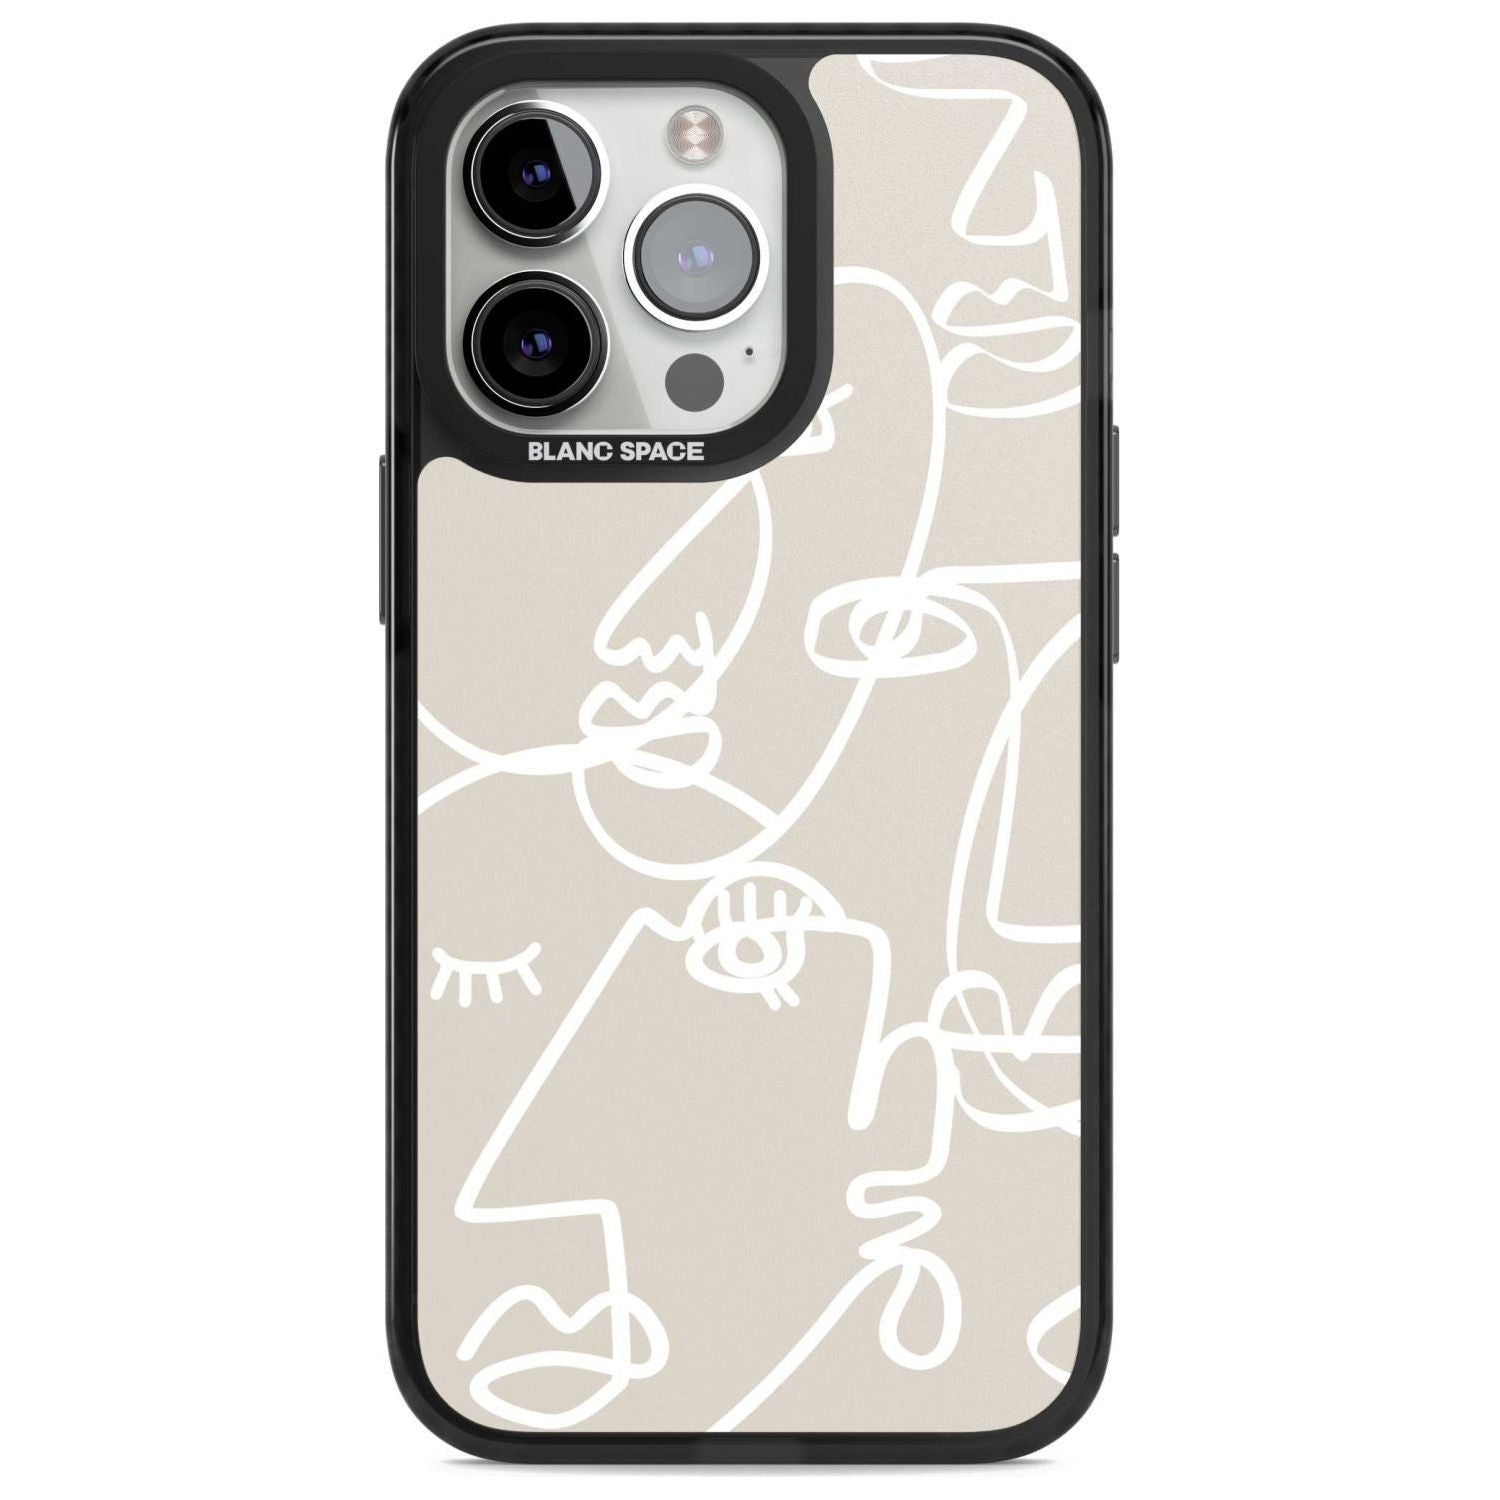 Abstract Continuous Line Faces White on Beige Phone Case iPhone 15 Pro Max / Magsafe Black Impact Case,iPhone 15 Pro / Magsafe Black Impact Case,iPhone 14 Pro Max / Magsafe Black Impact Case,iPhone 14 Pro / Magsafe Black Impact Case,iPhone 13 Pro / Magsafe Black Impact Case Blanc Space